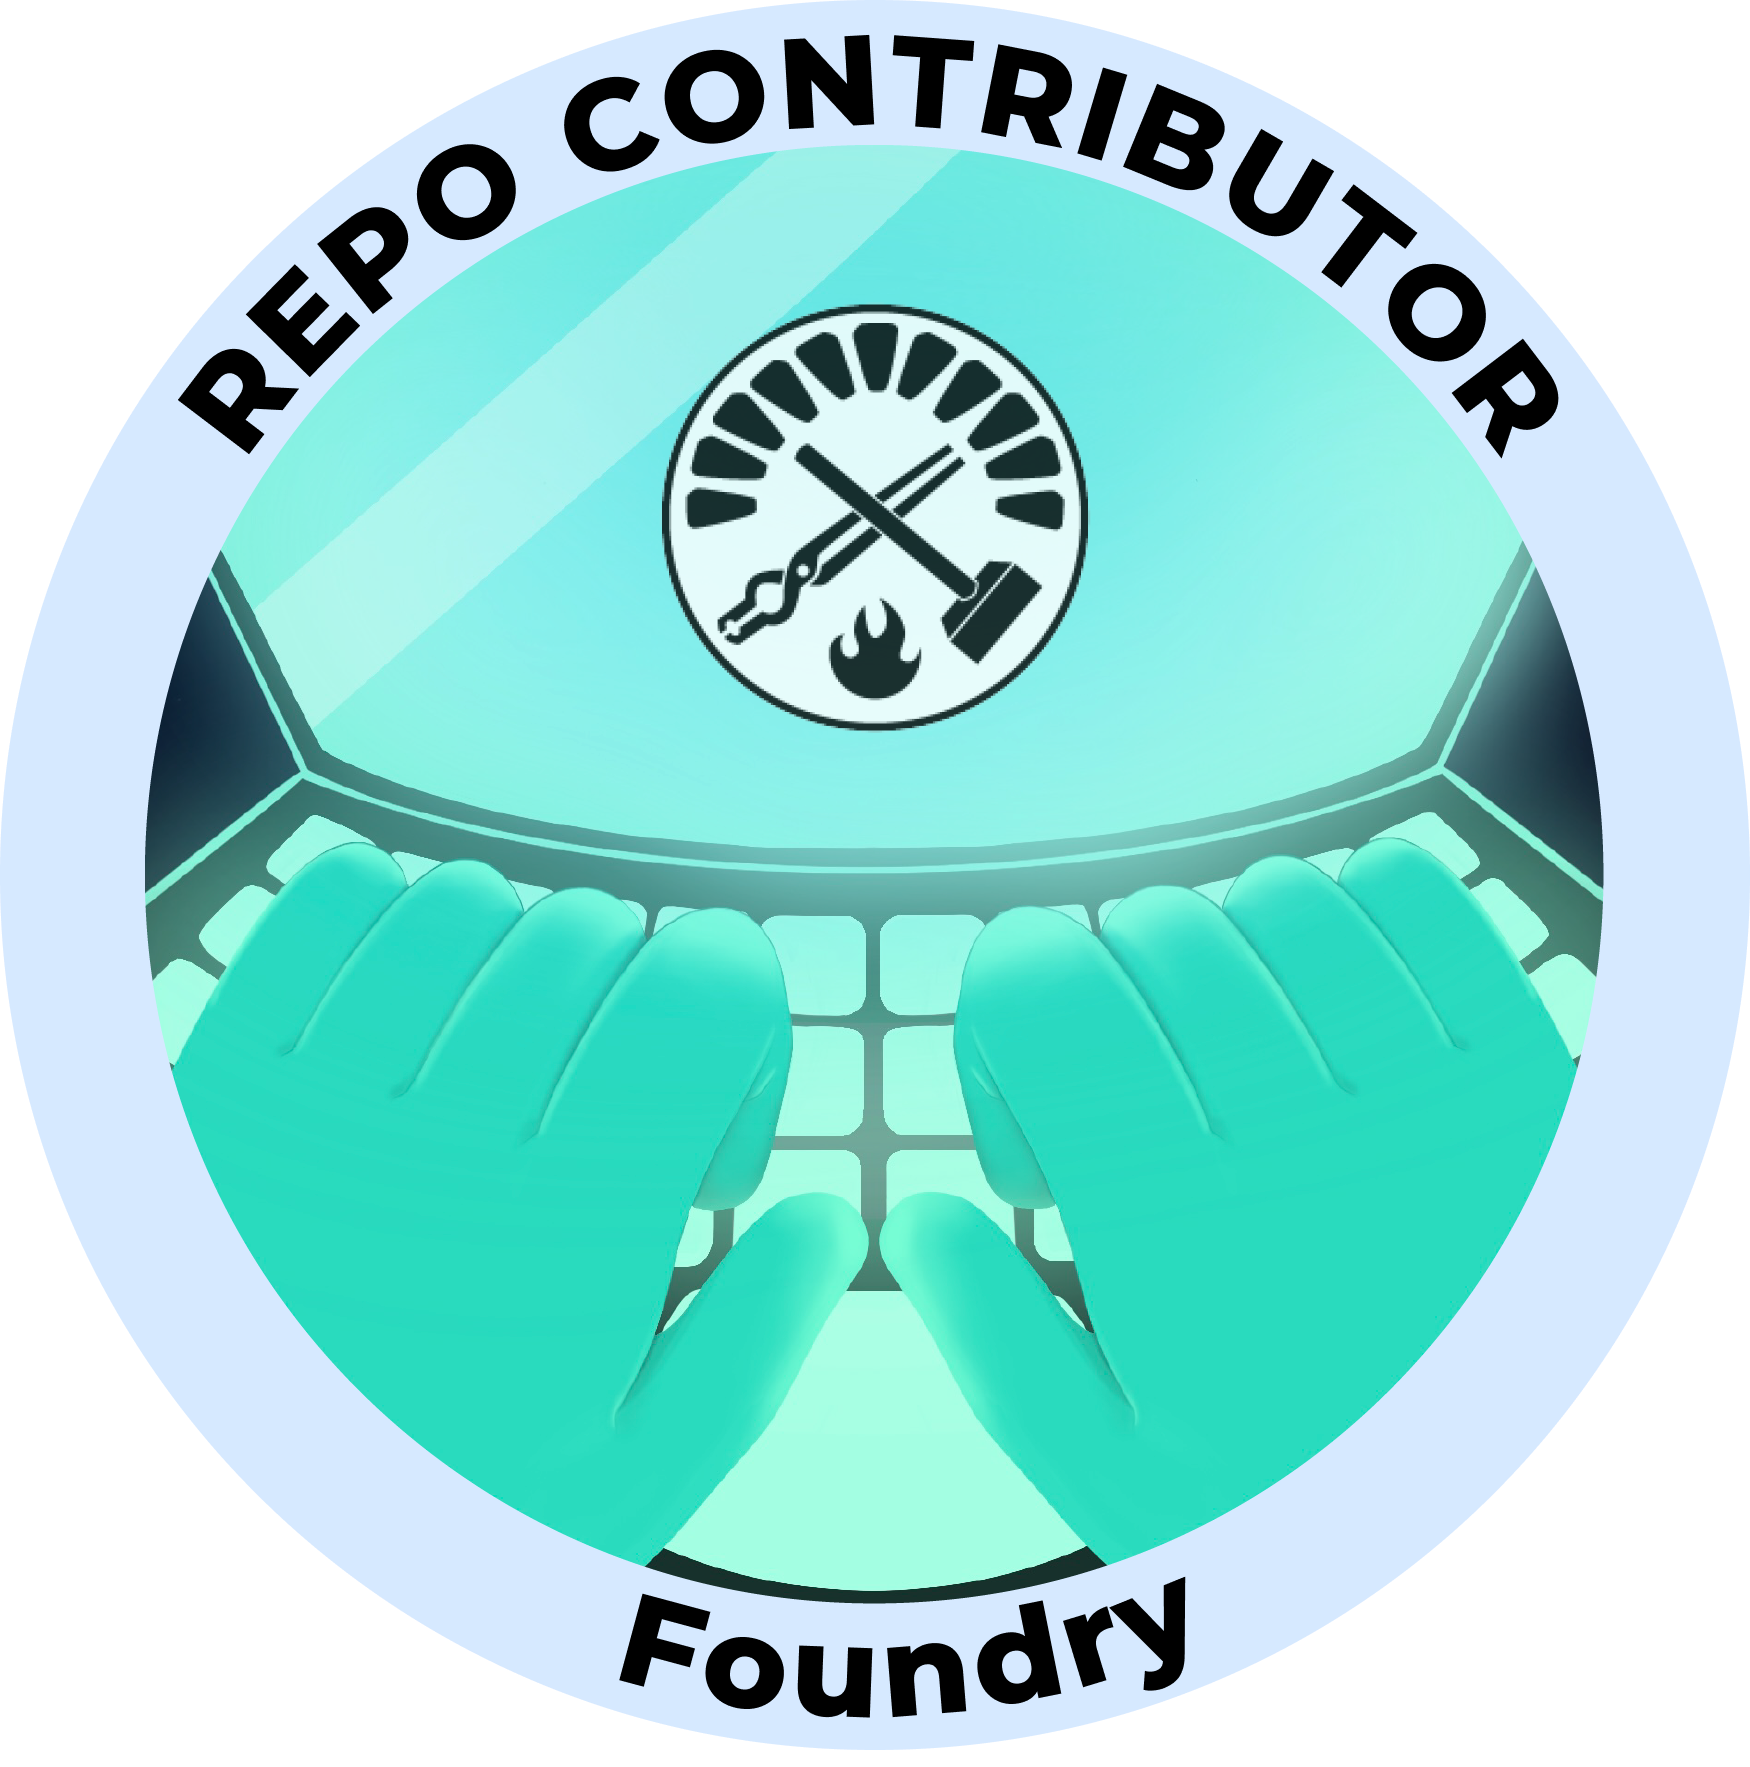 Web3 Badge | Project Contributor: Foundry